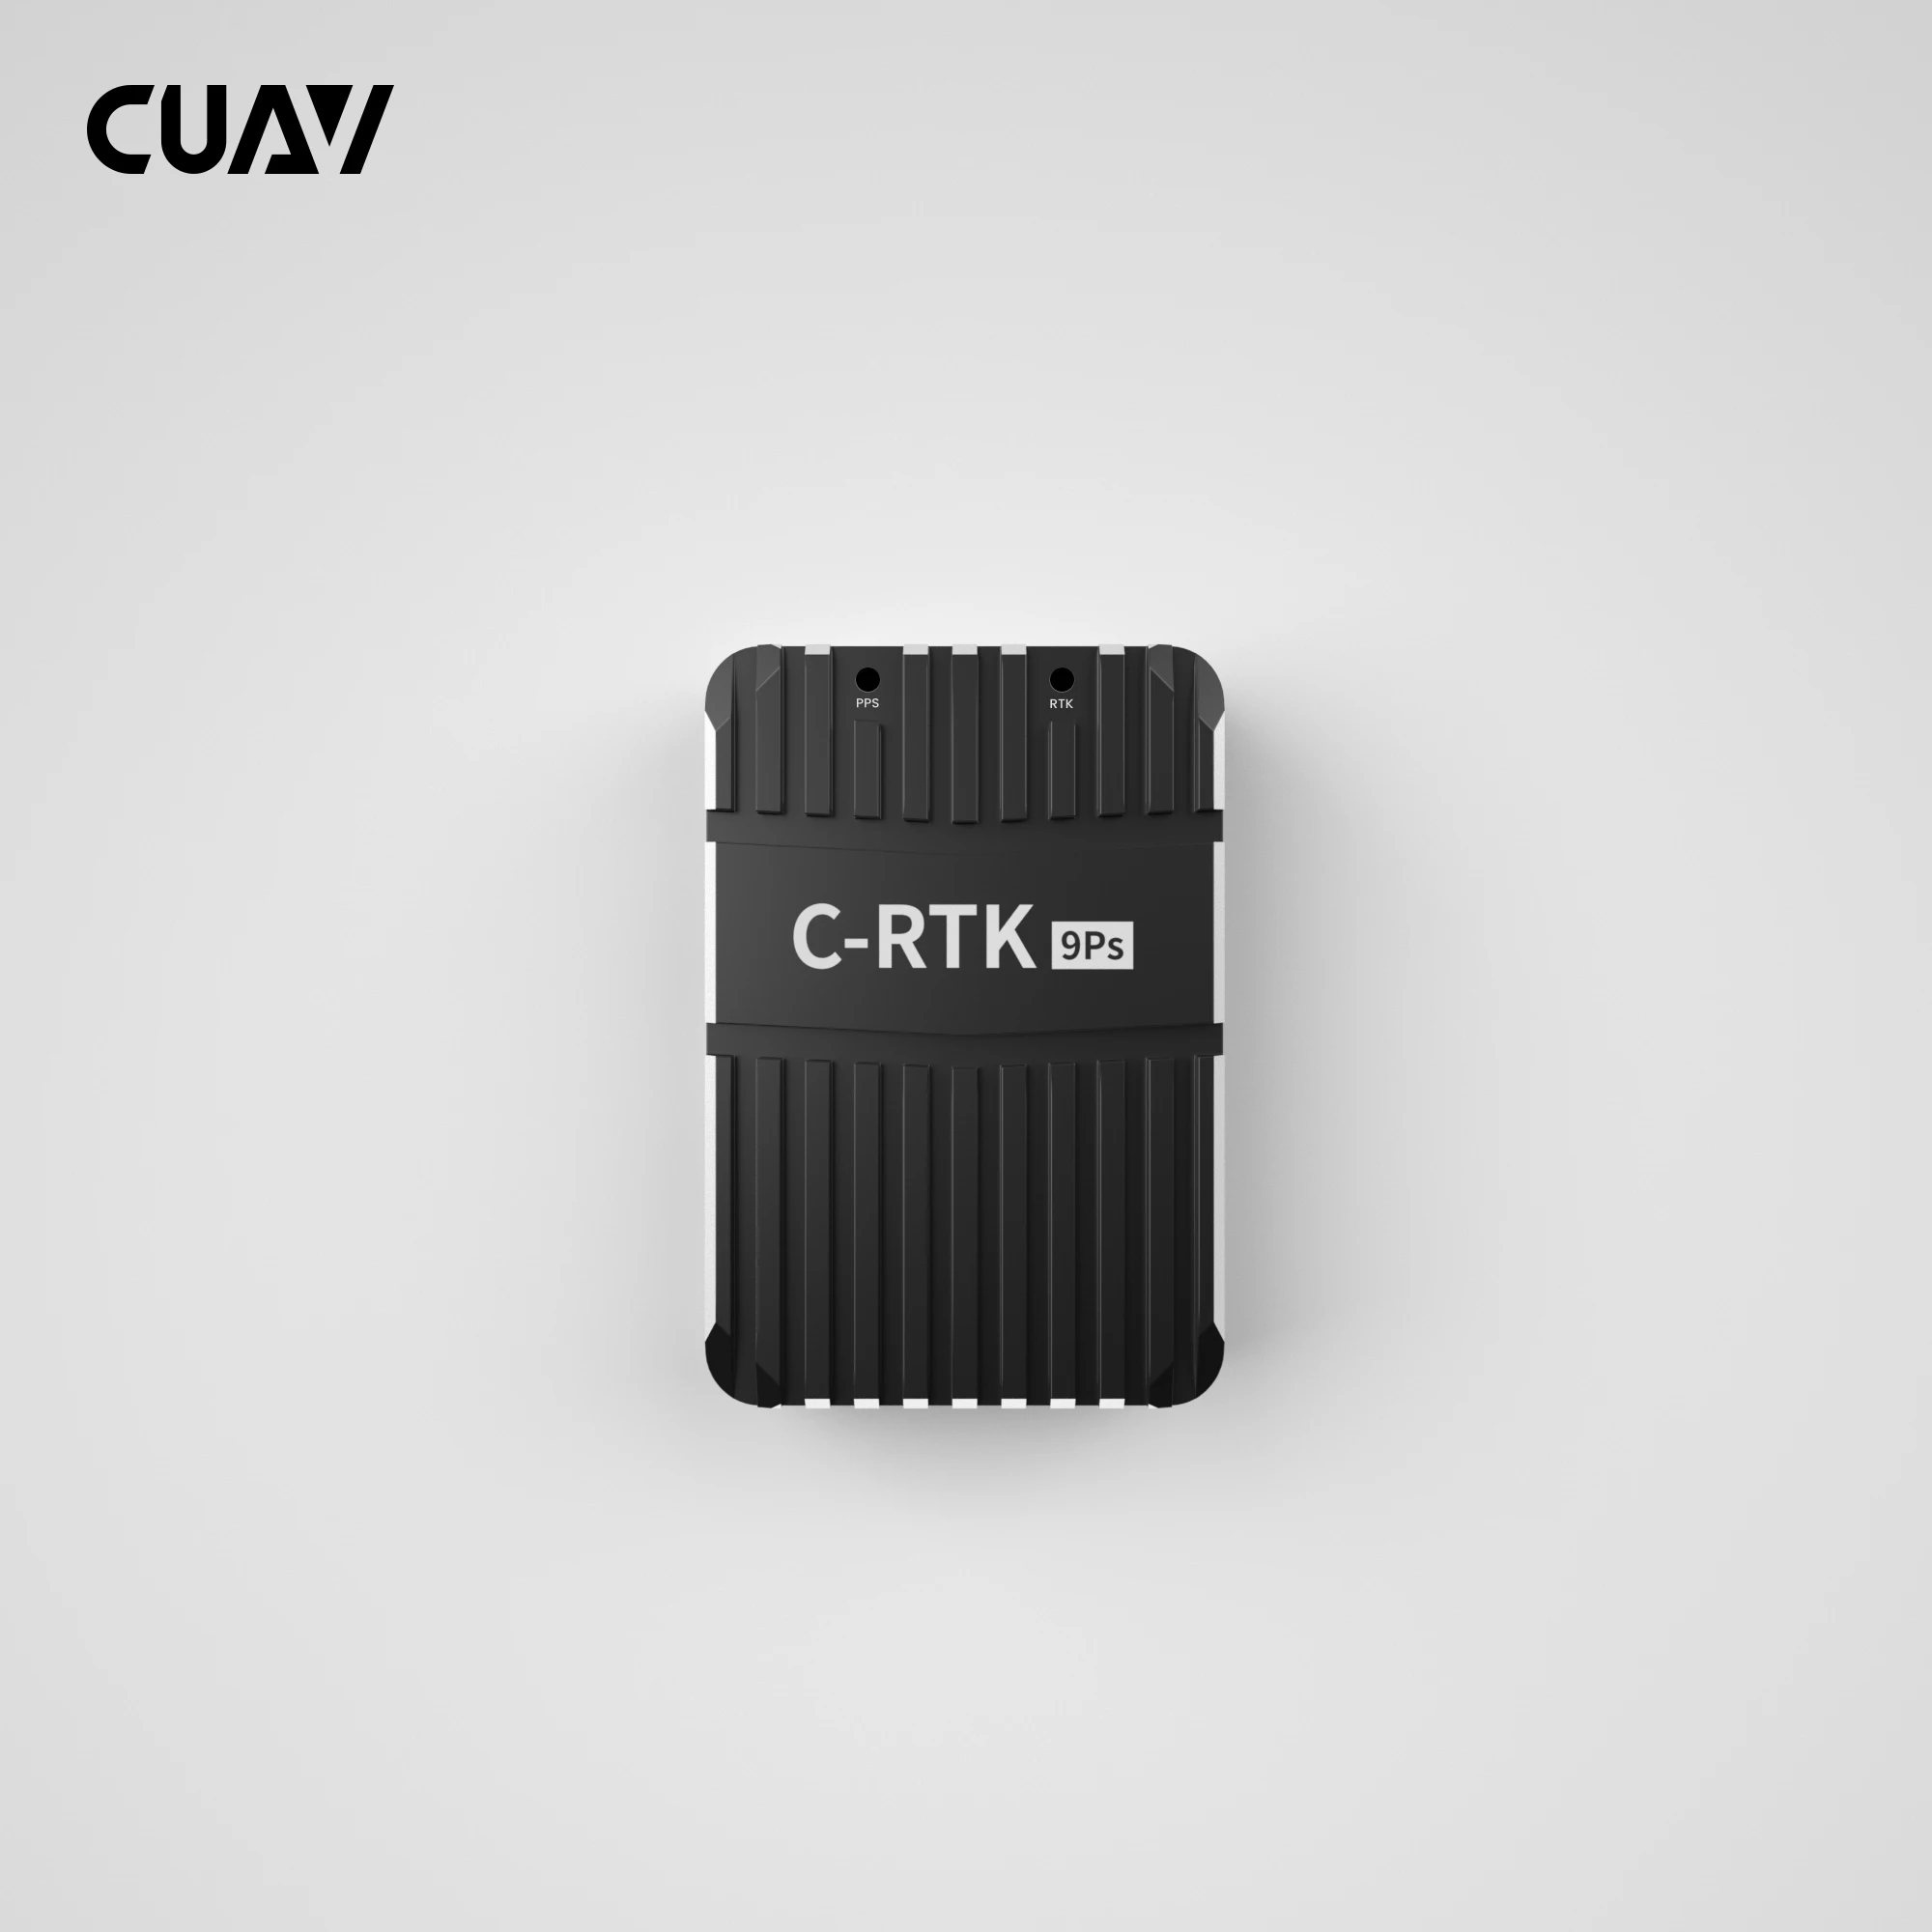 

CUAV Dual RTK 9Ps For Yaw Centimeter-level C-RTK 9Ps Positioning High Precision GPS GNSS Module